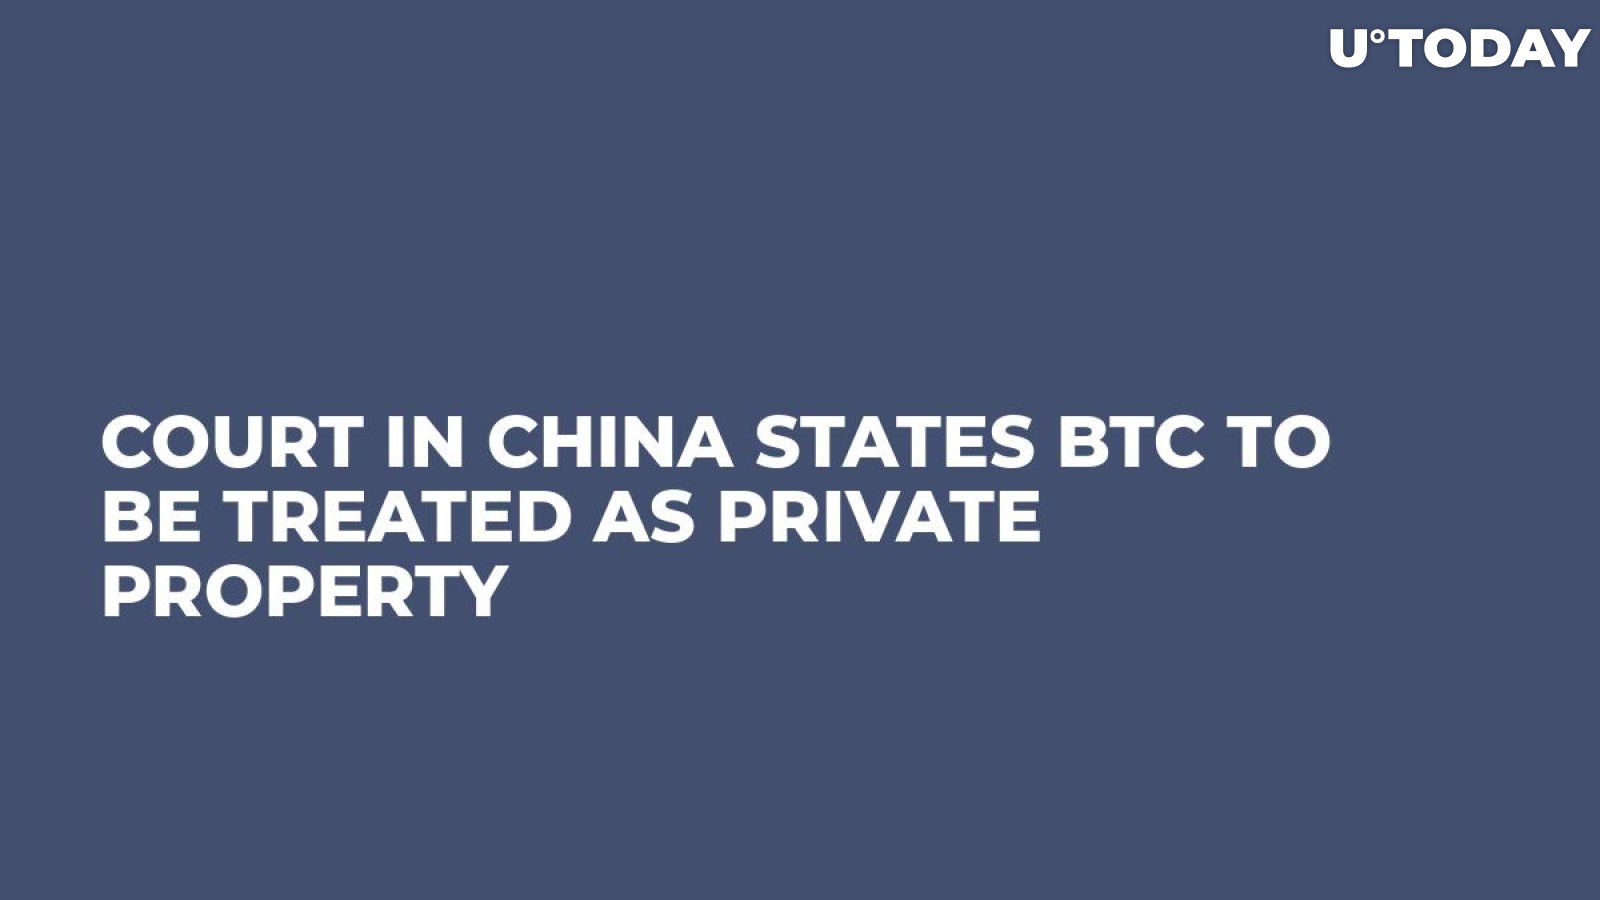 Court in China States BTC to Be Treated as Private Property